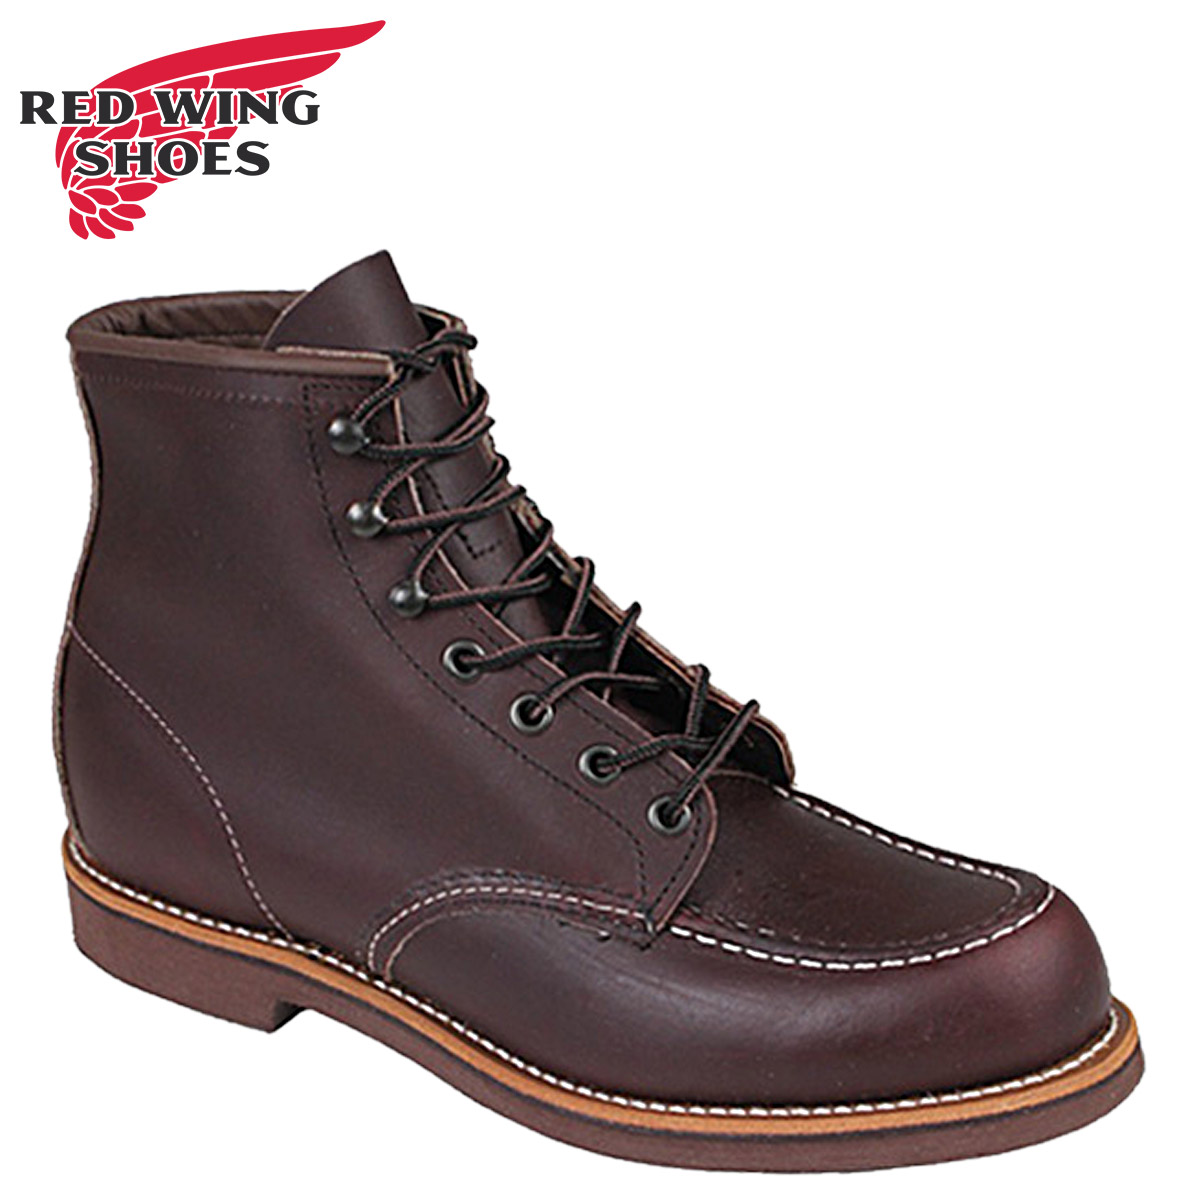 6 inch moc toe boot red wing